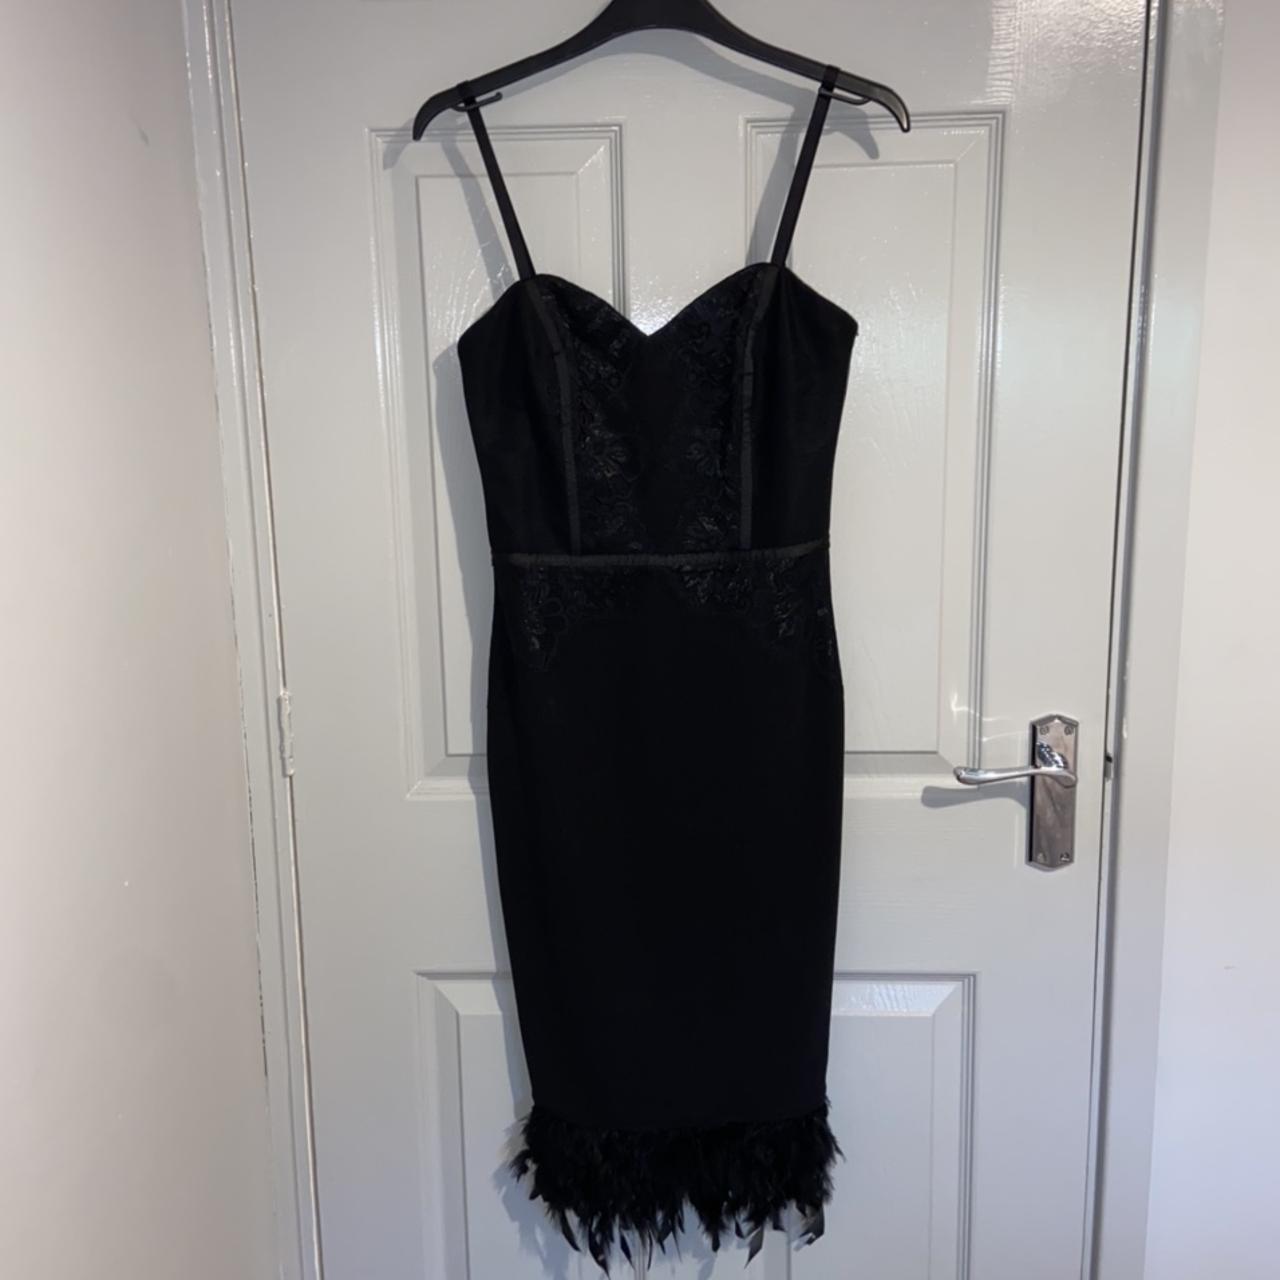 LIPSY LONDON Ivory Black Lace Bodycon Sexy Party Coctai Dress NWOT